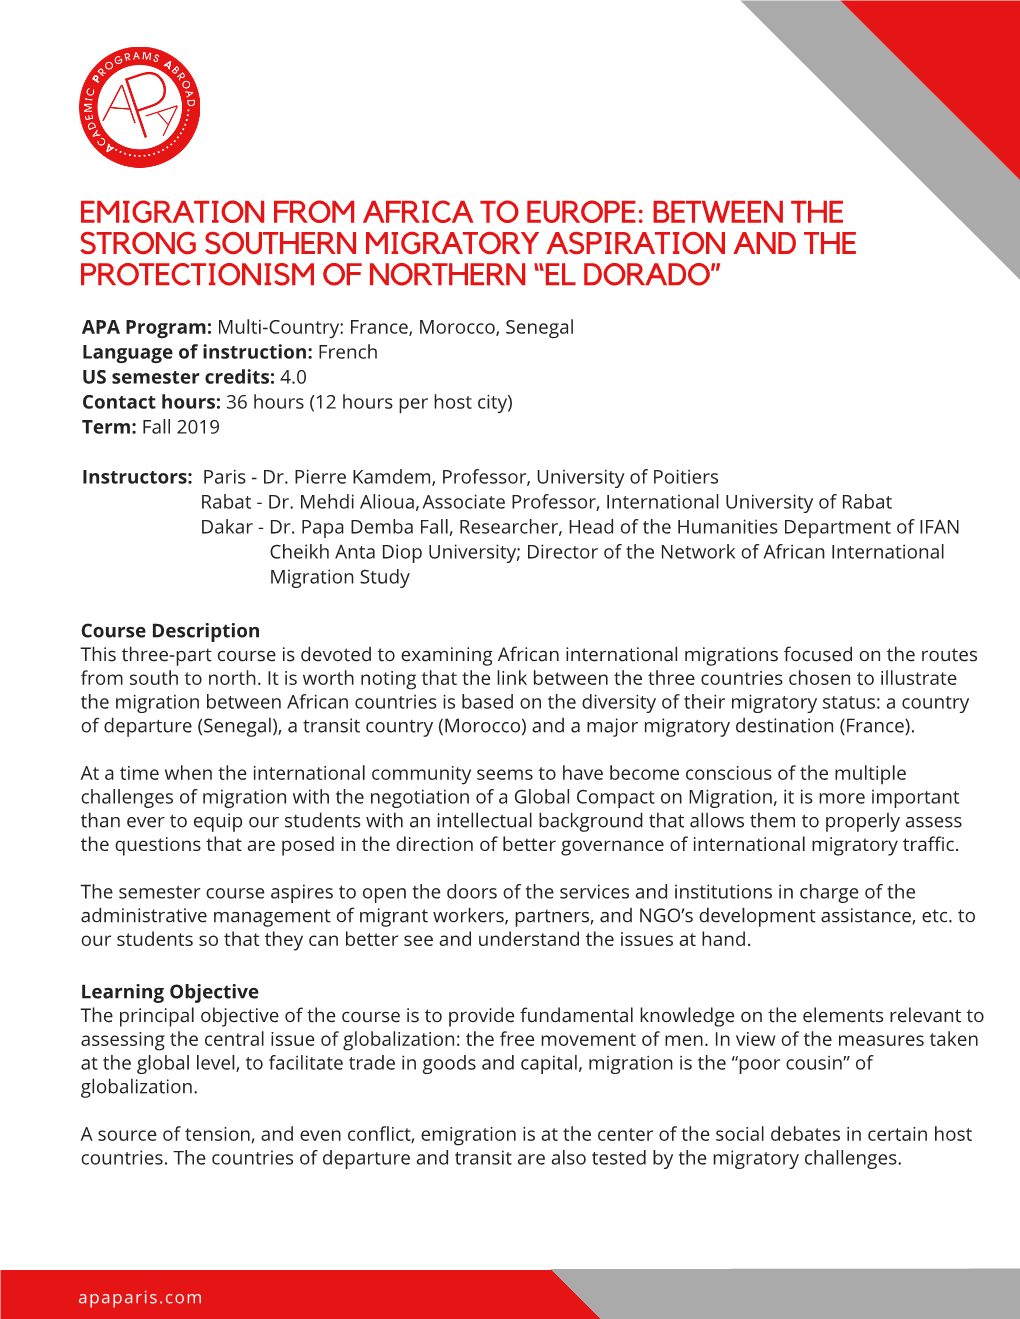 Emigration from Africa to Europe Syllabus